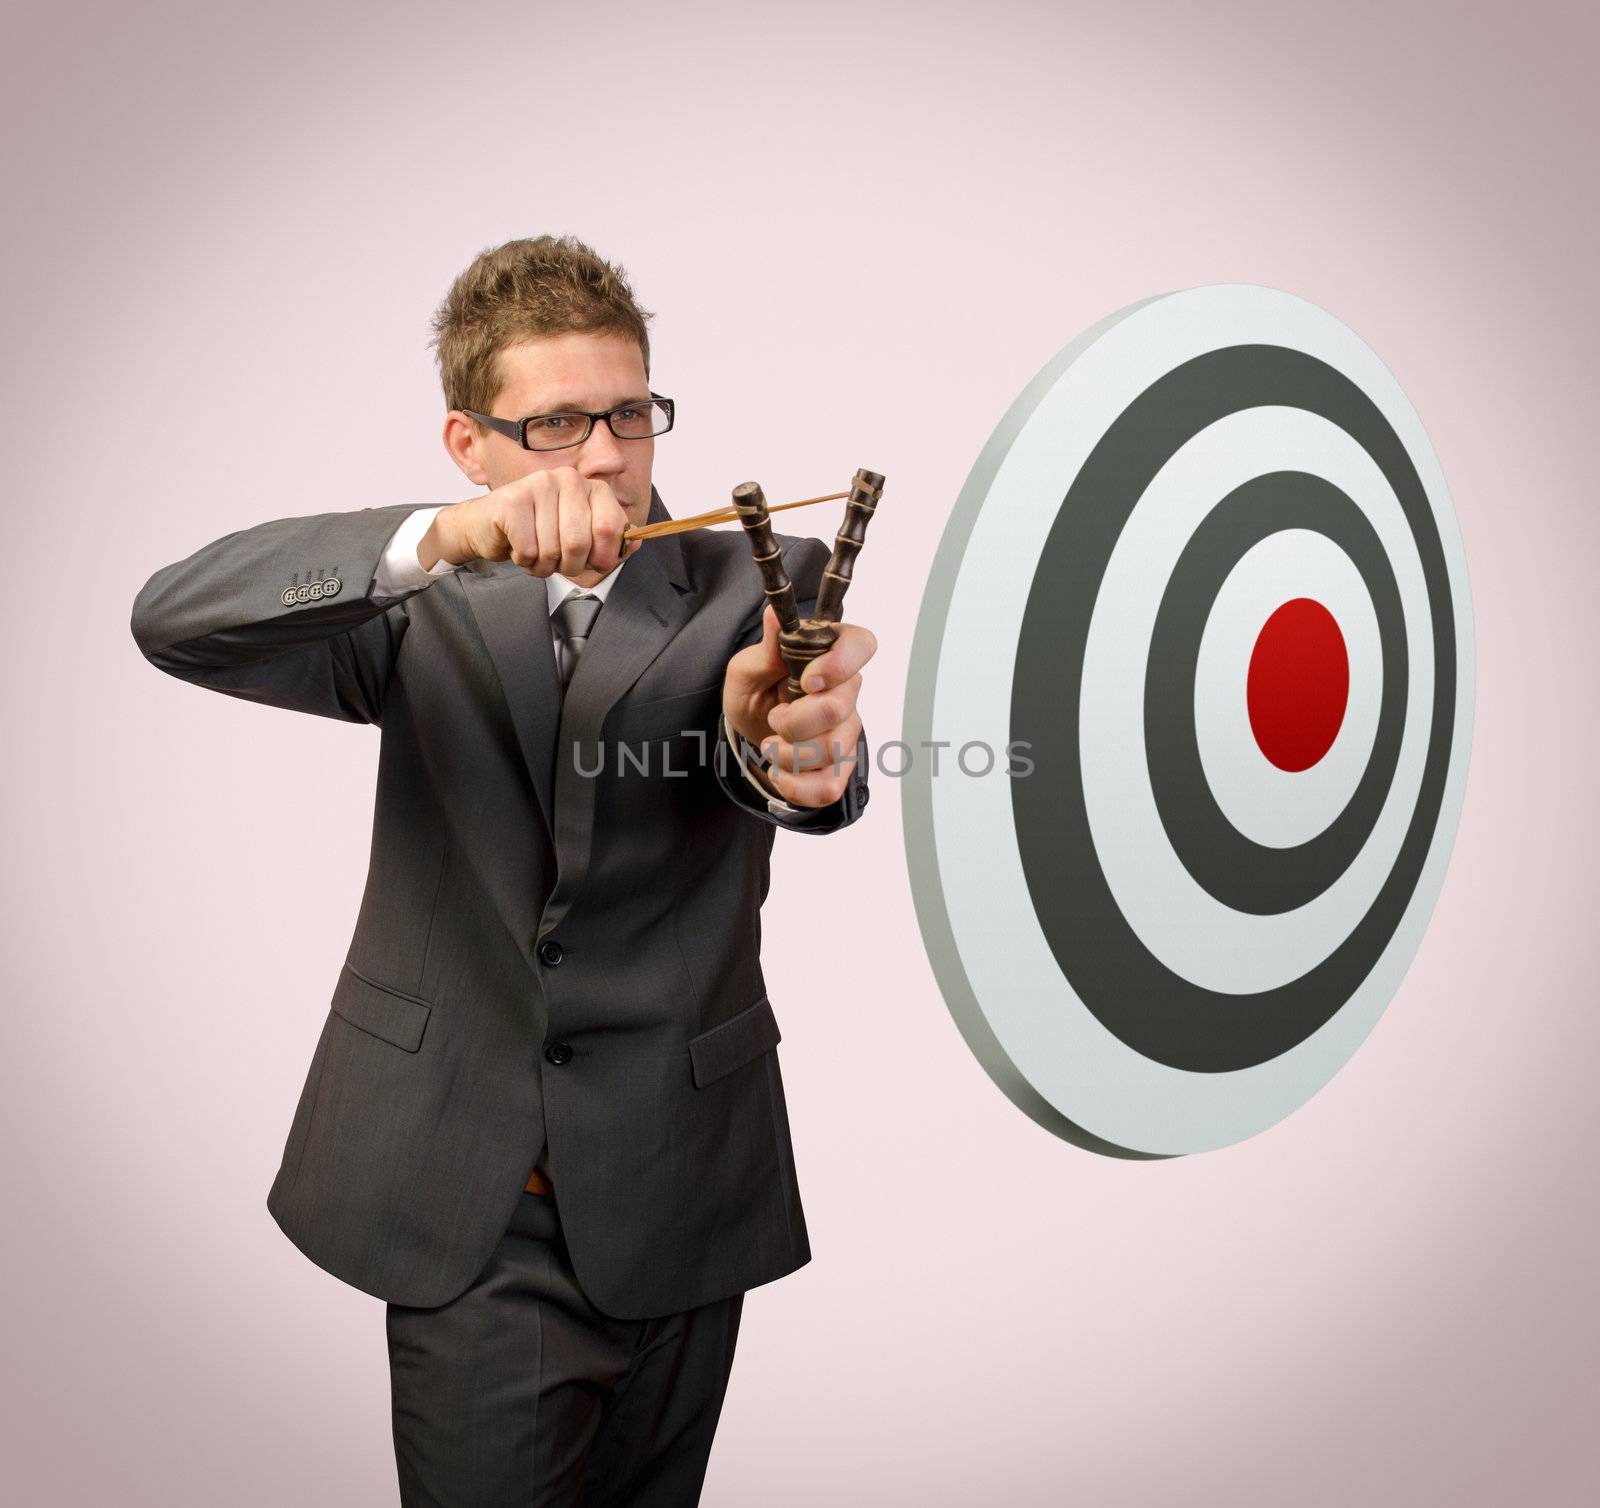 Businessman with slingshoot aiming target